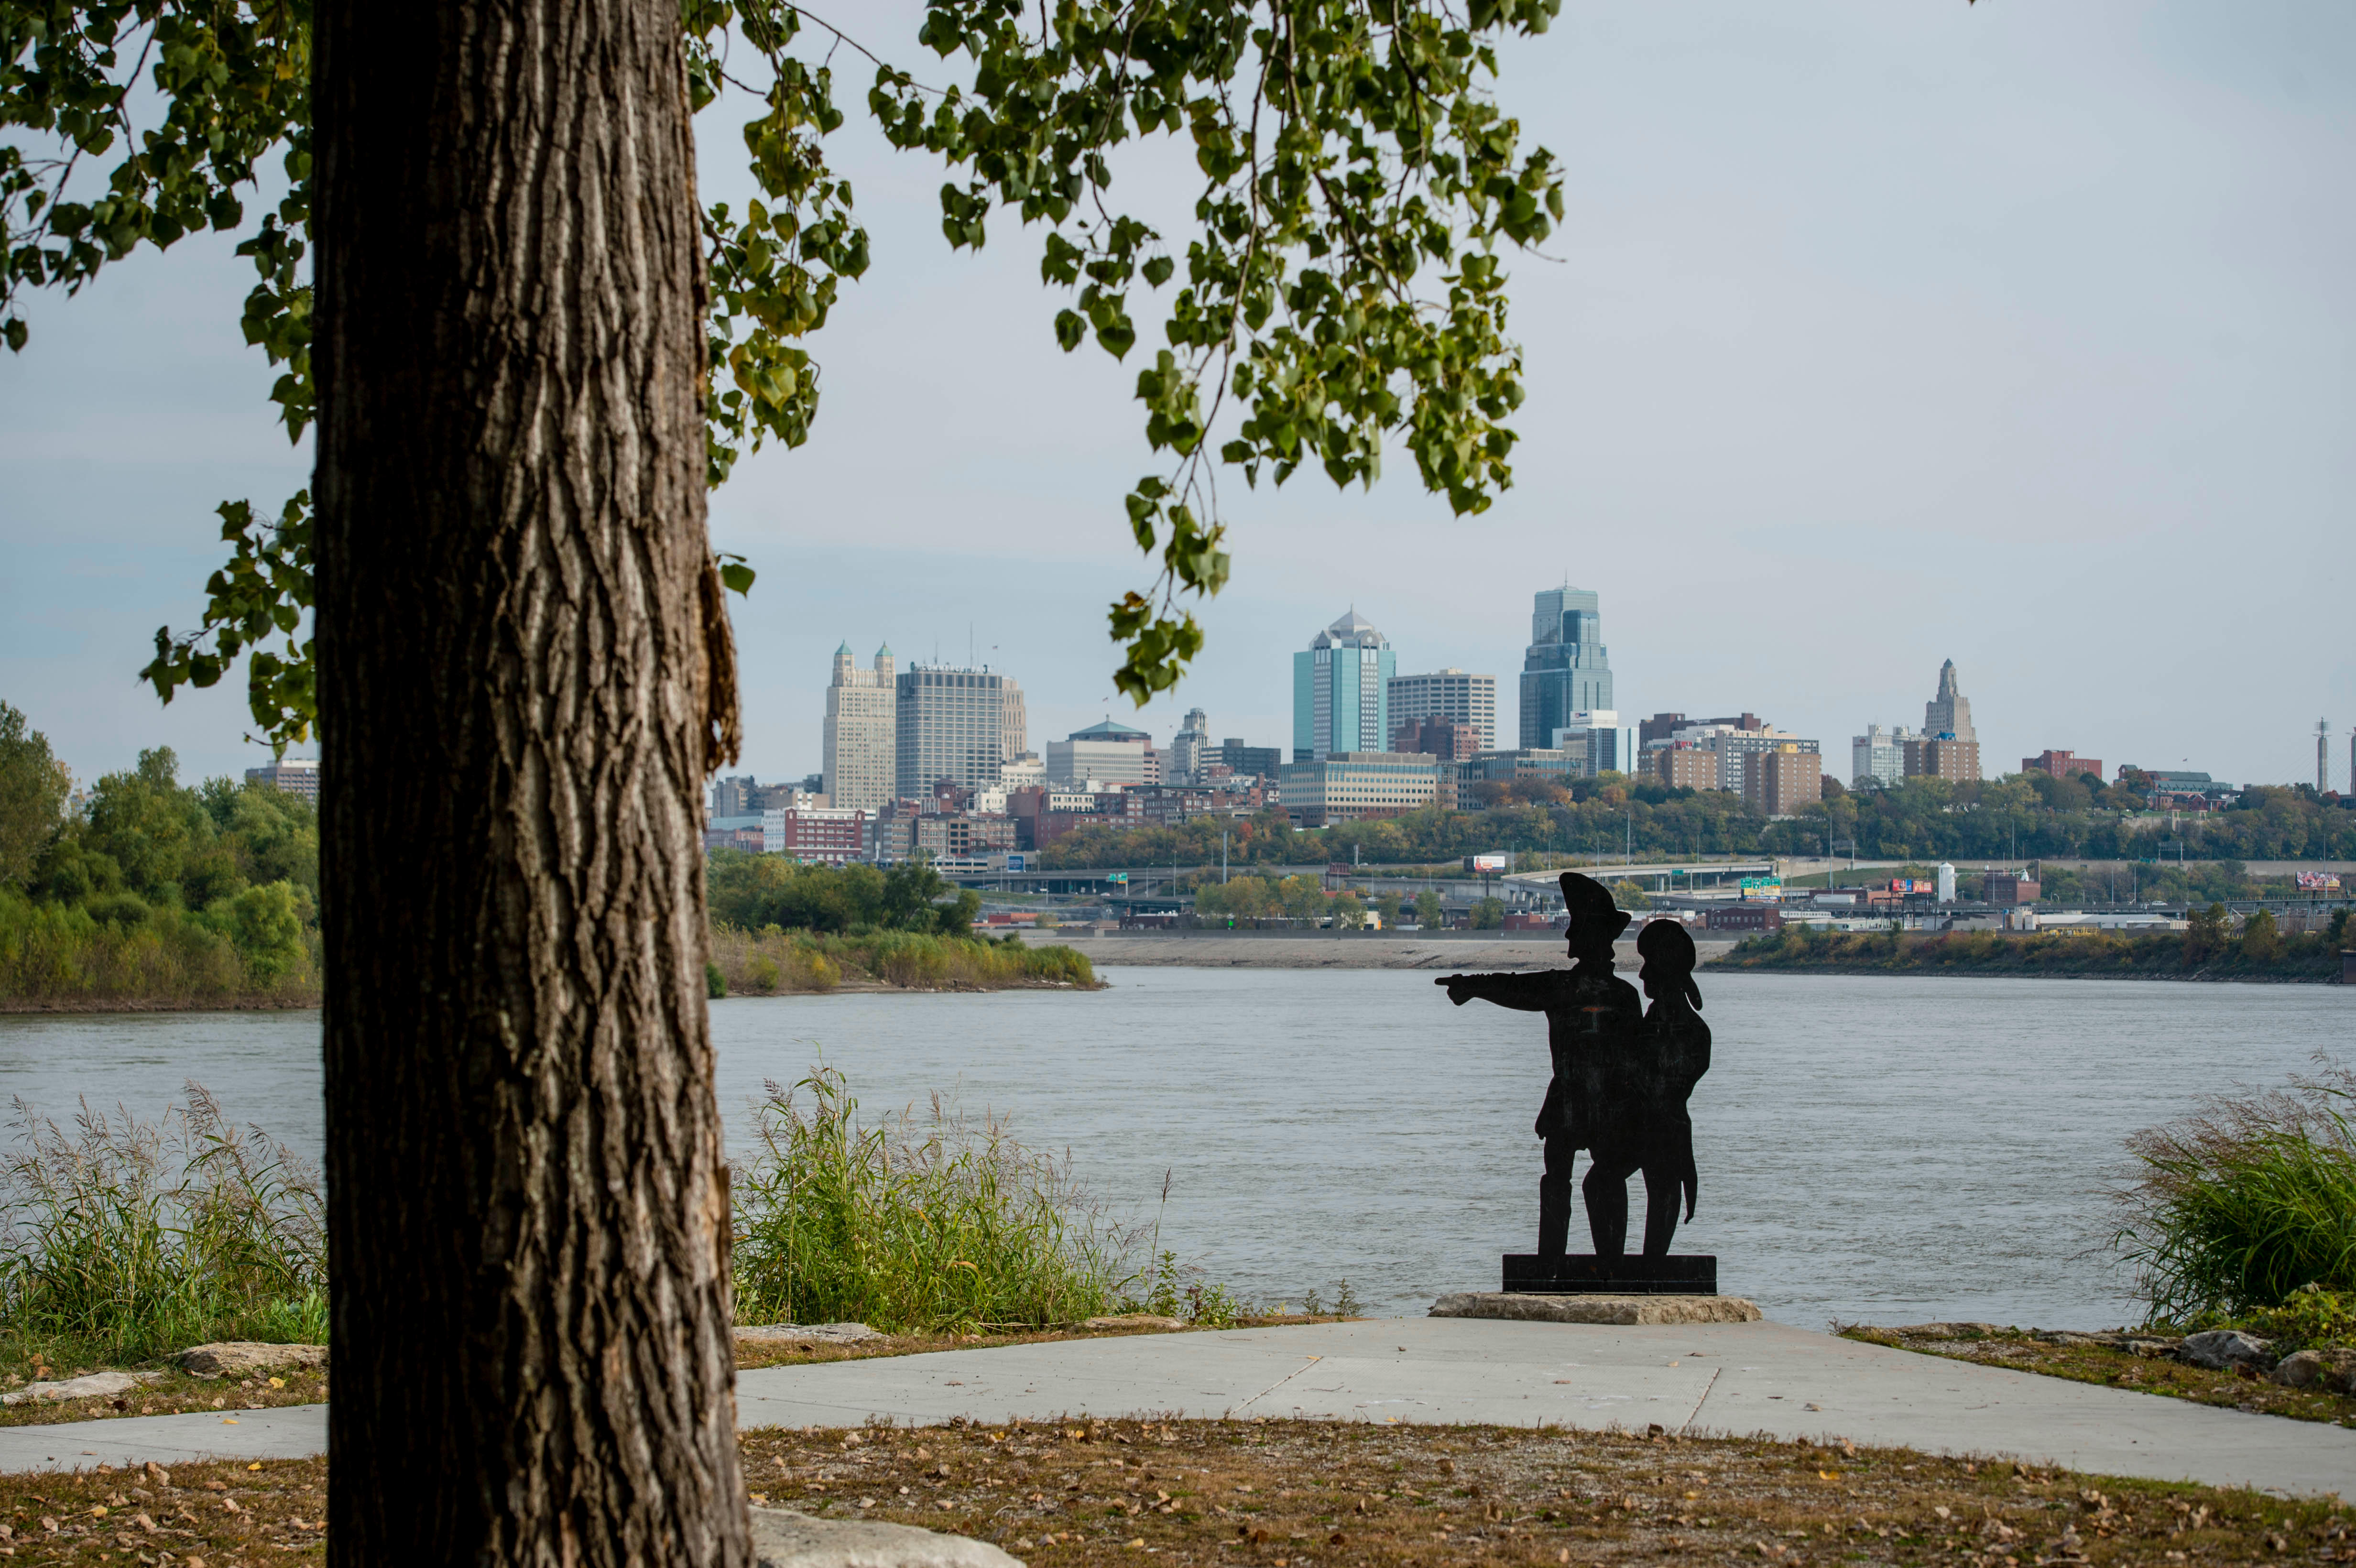 Lewis and Clark Park at Kaw Point in Kansas City, Kansas, offers a dramatic view of downtown Kansas City at the intersection of the Missouri and Kansas Rivers.